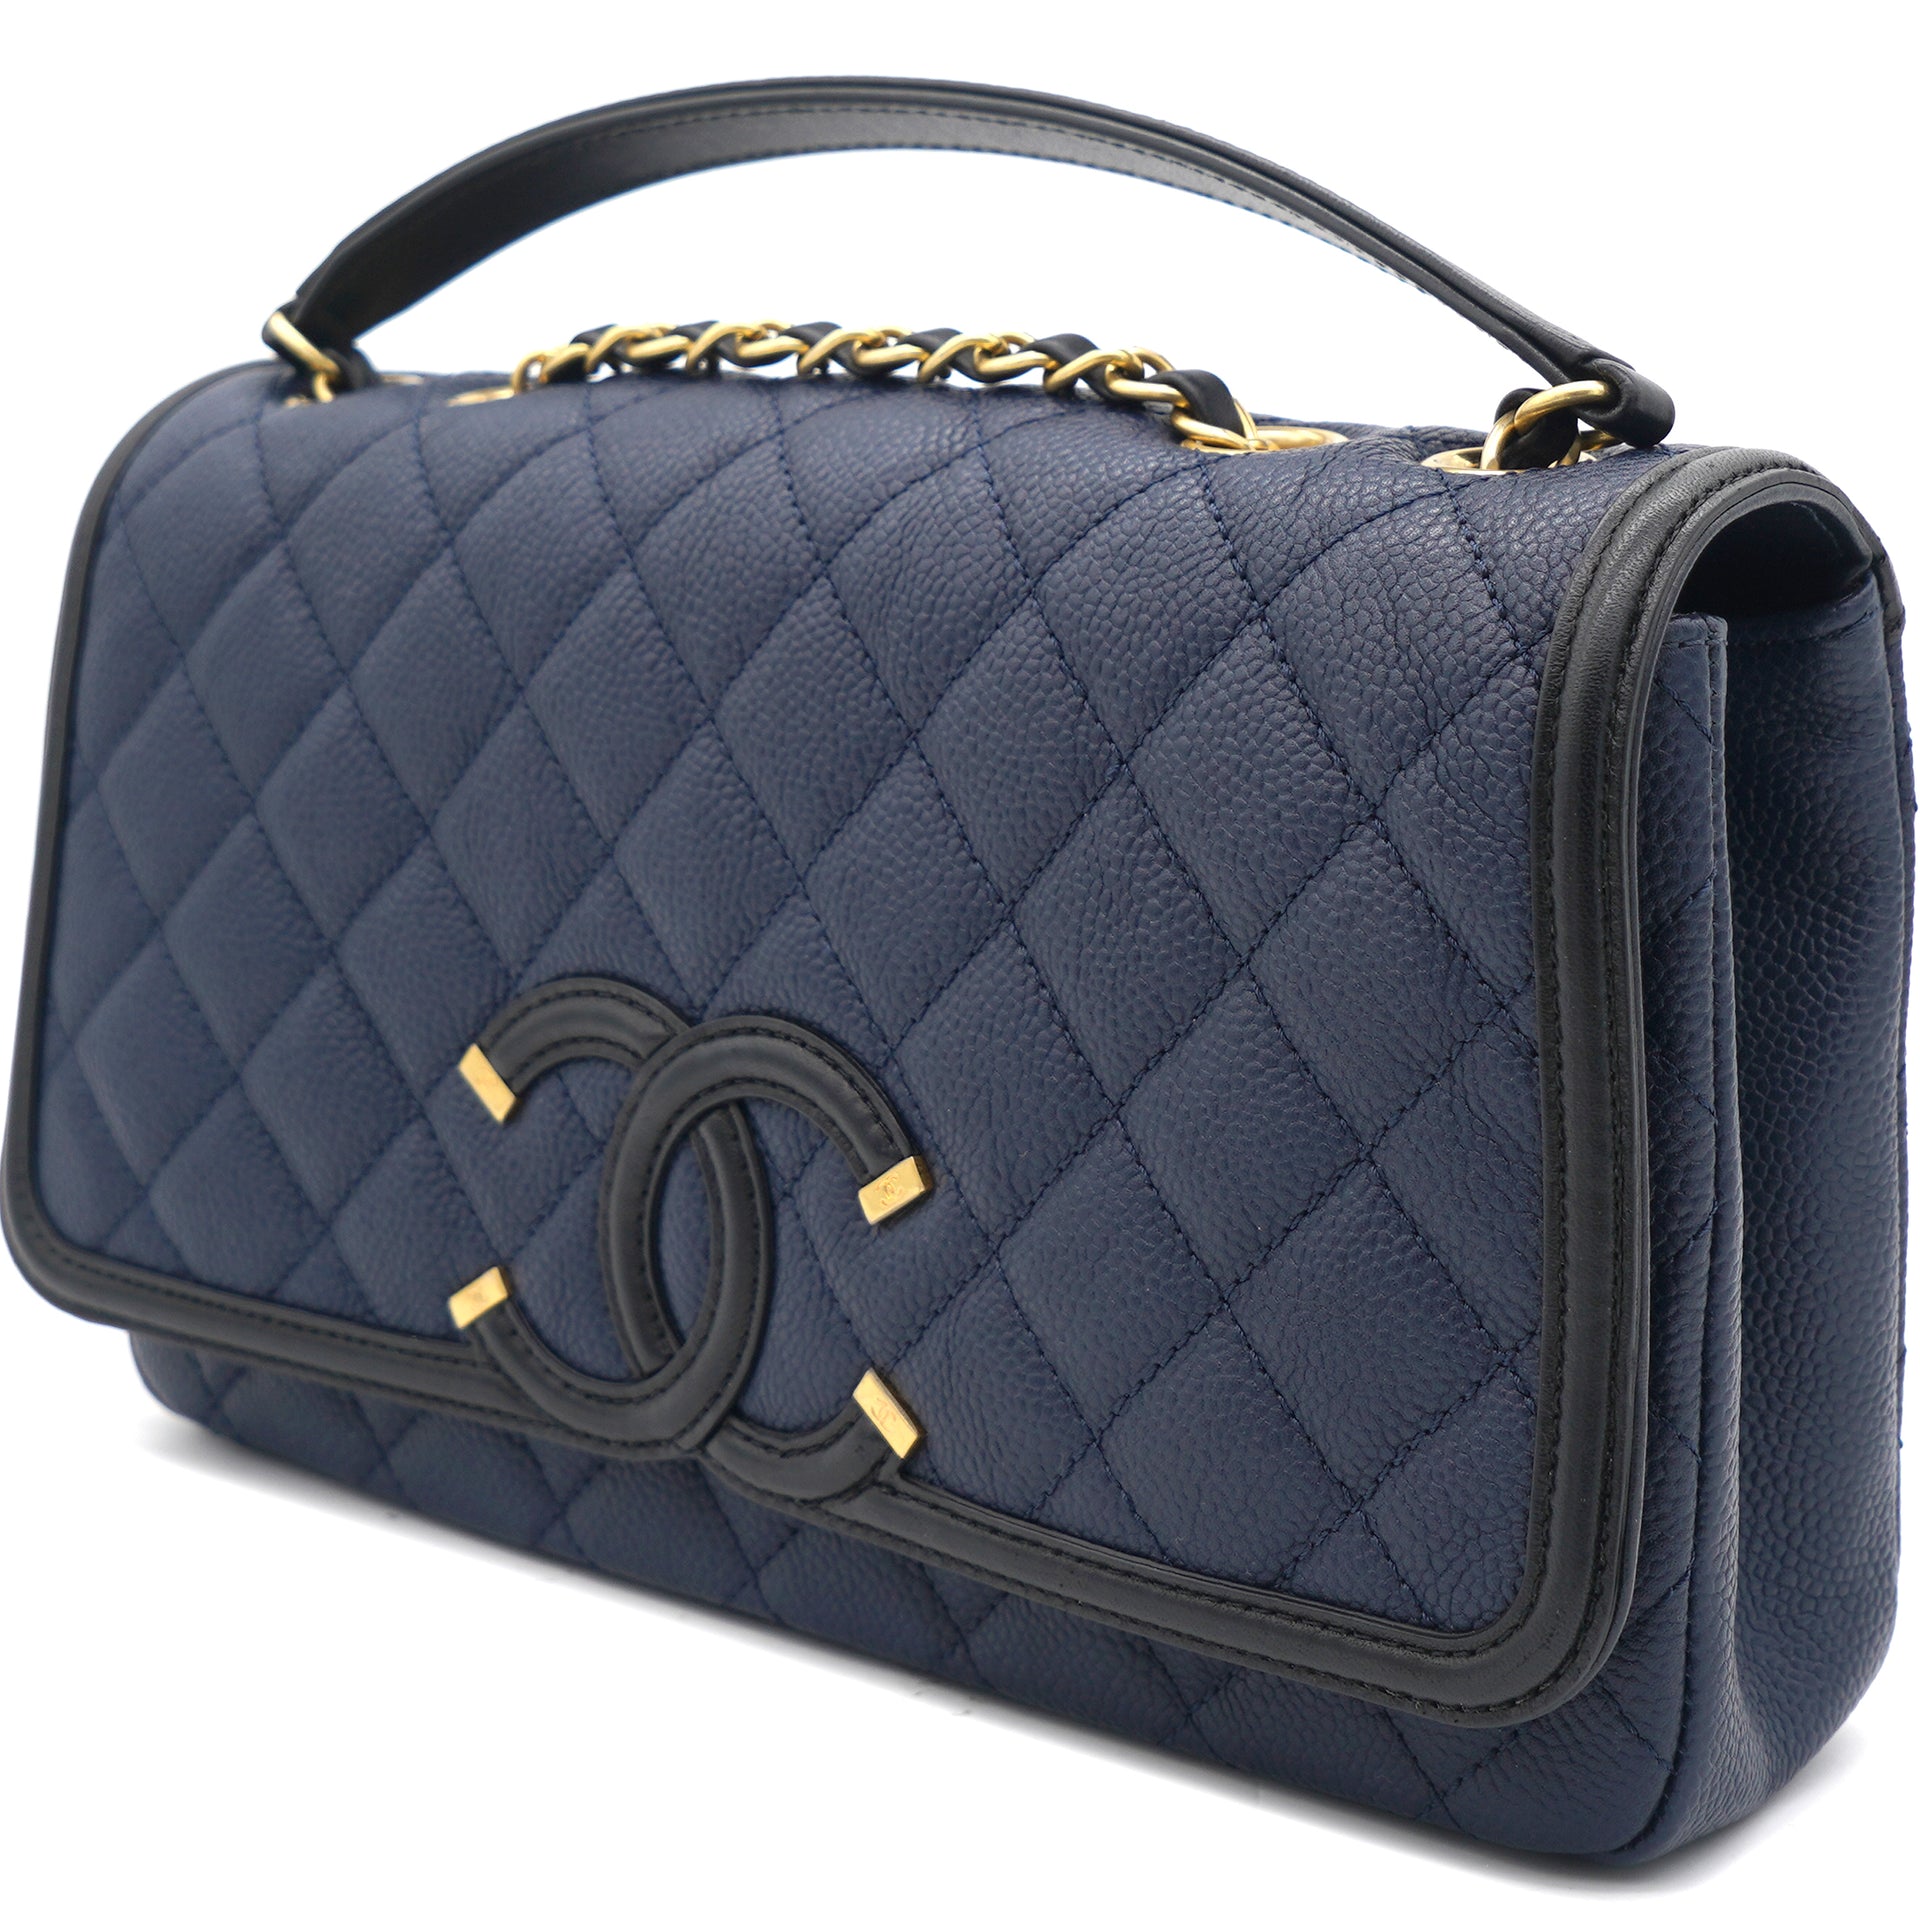 Chanel Filigree Flap Small, Beige and Black with Gold Hardware